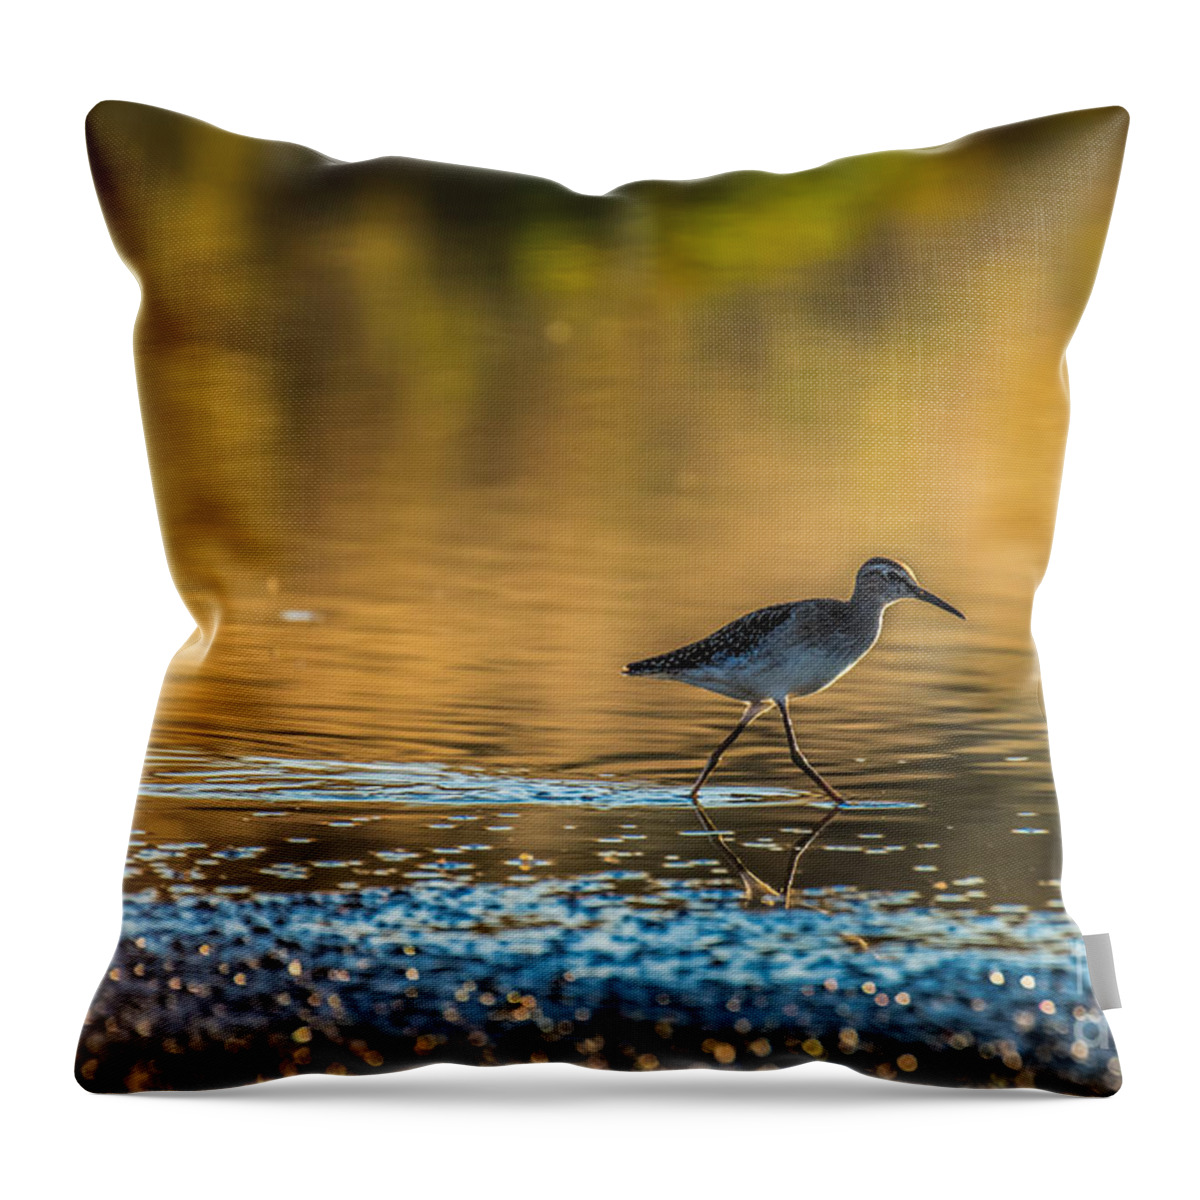 Animal Throw Pillow featuring the photograph Wading by Jivko Nakev